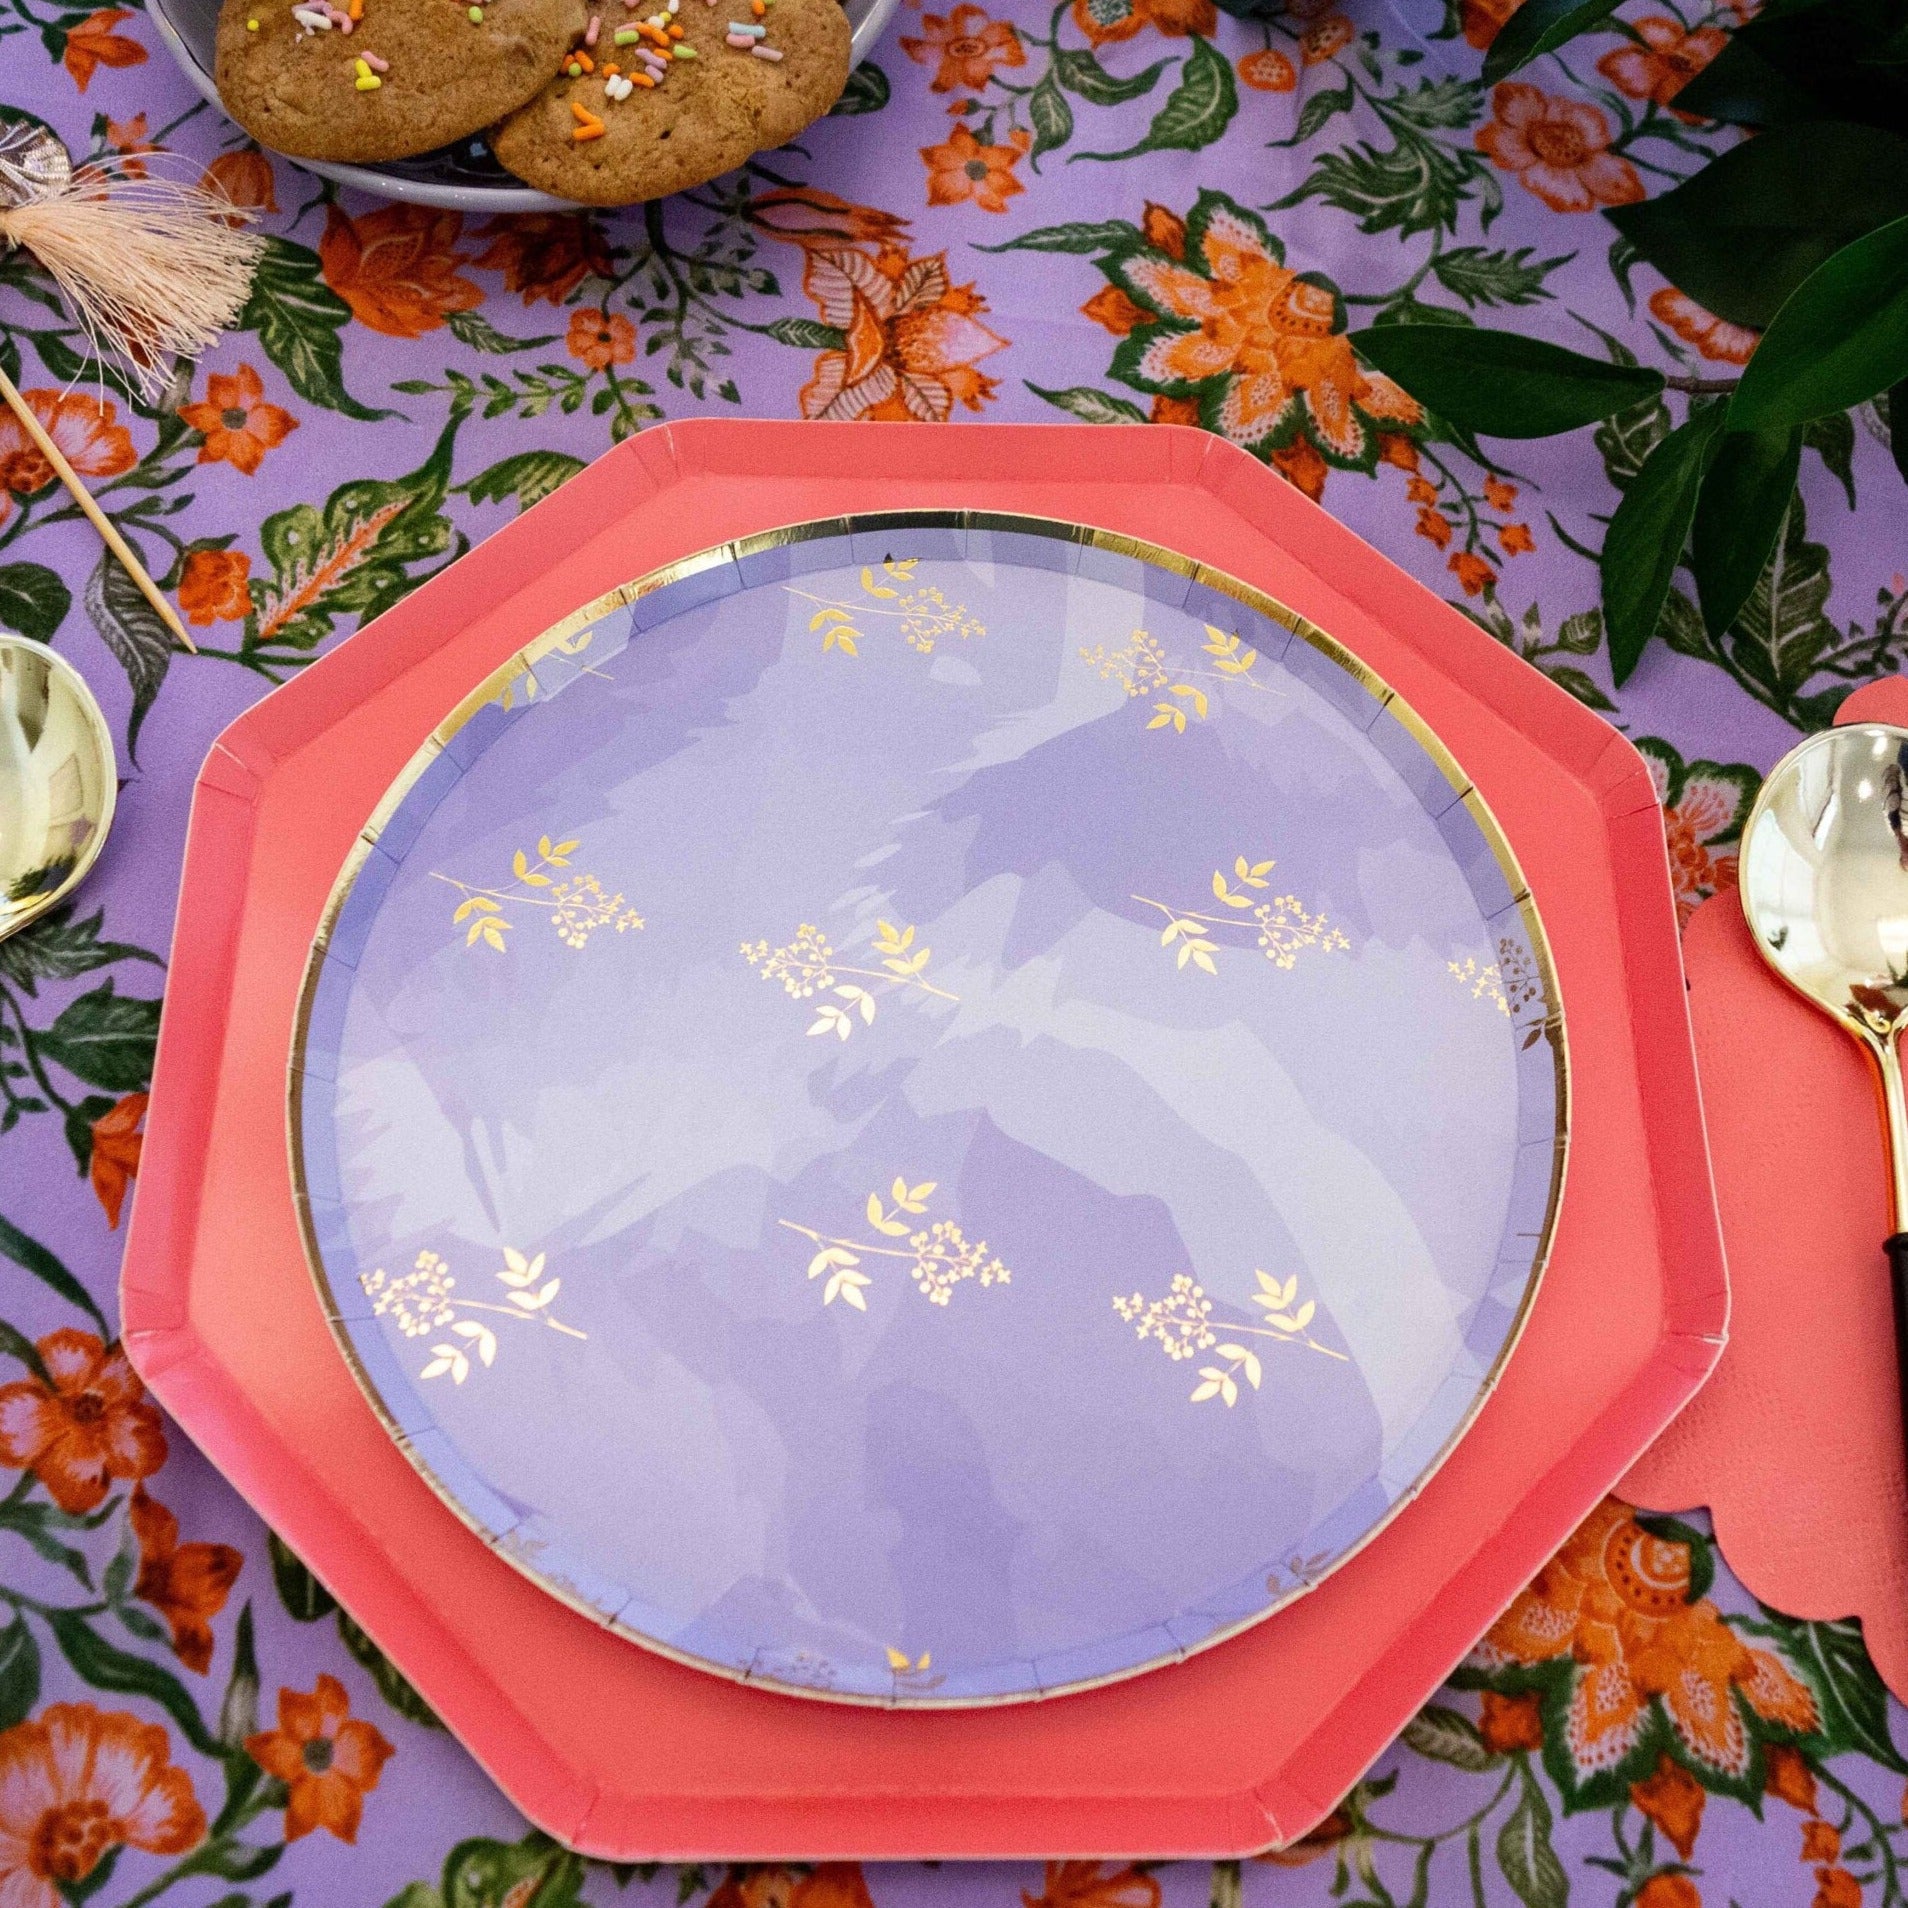 Lavender party plate with gold foil pattern